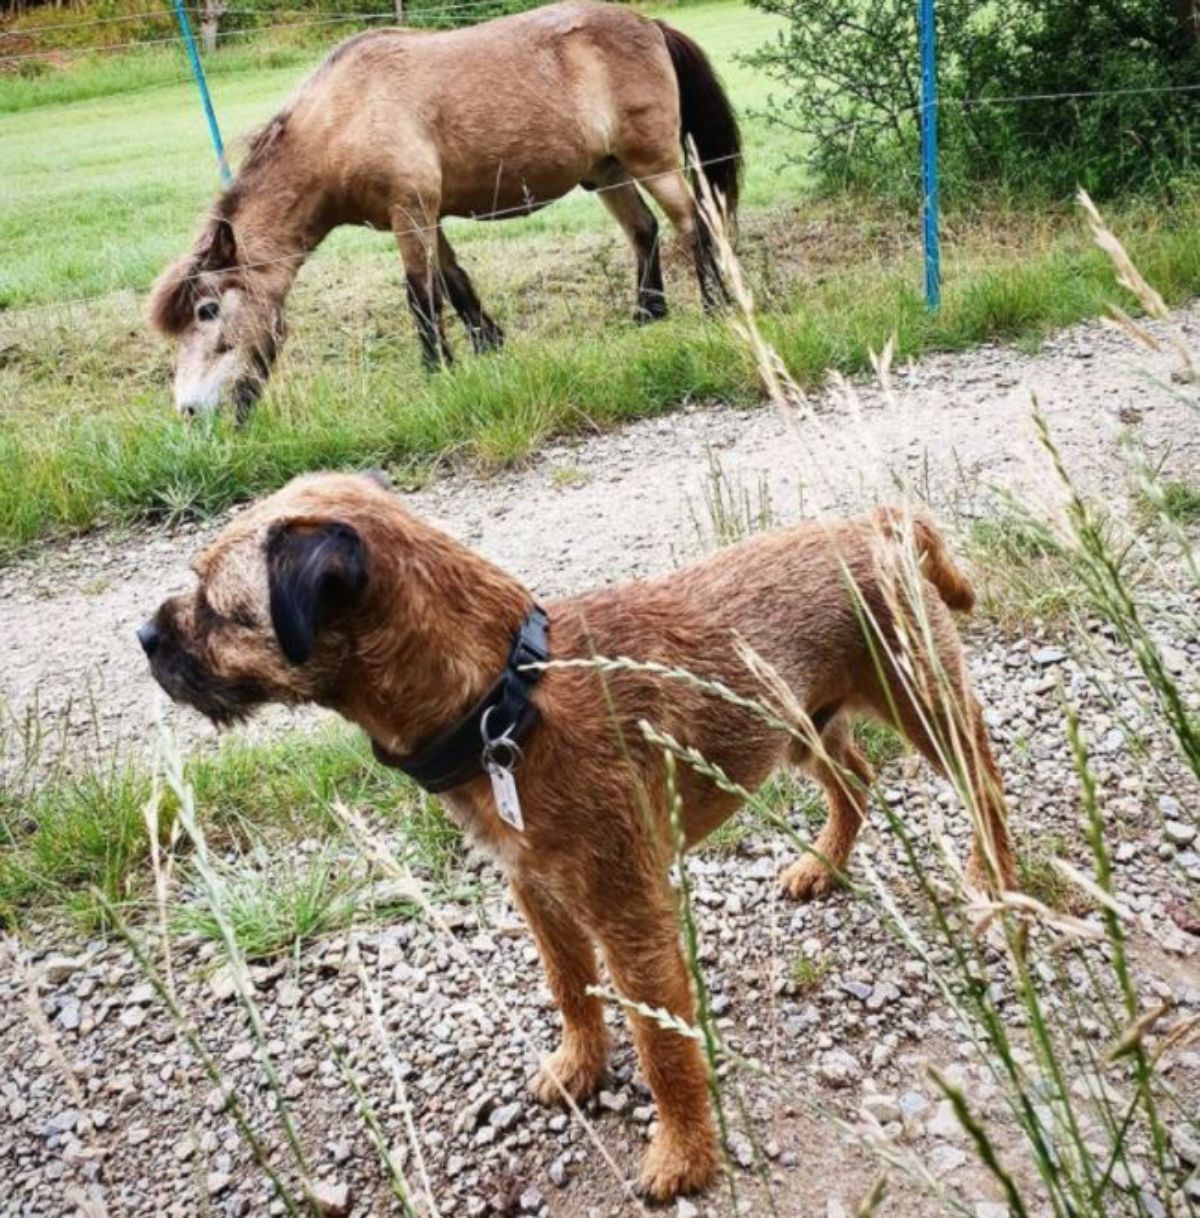 brown dog standing a little away from a brown donkey